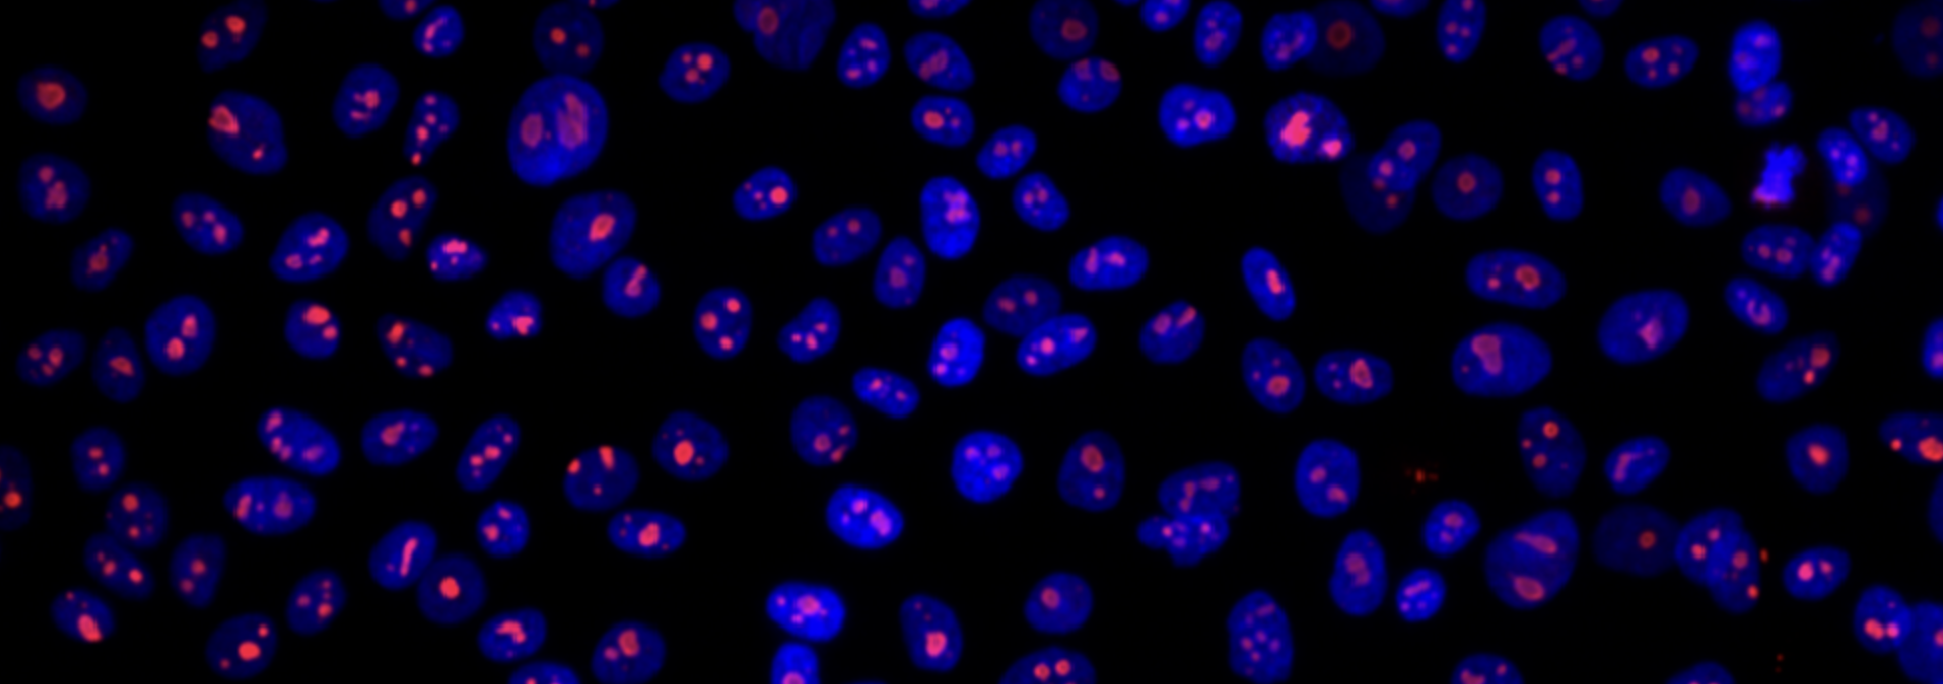 Image of fluorescently tagged cells